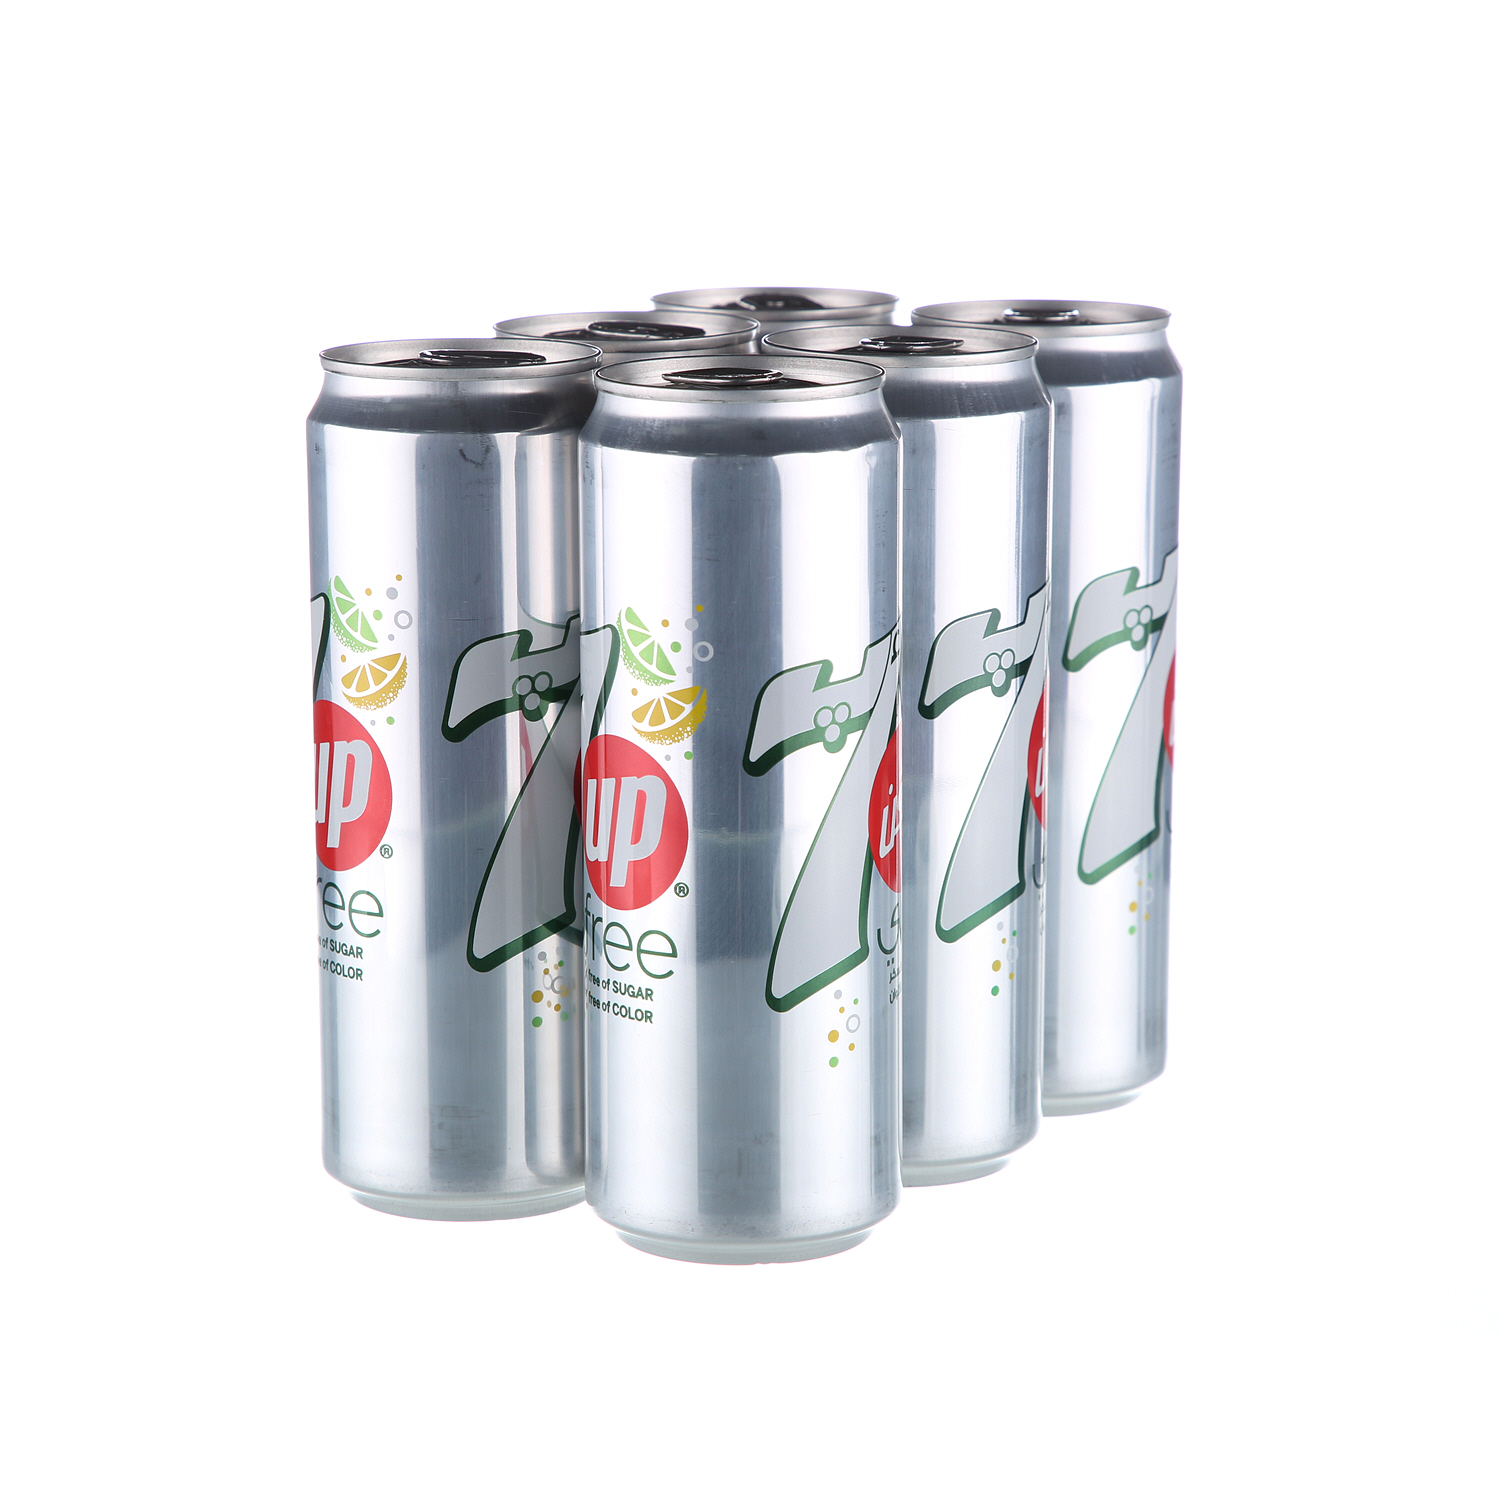 7UP Free Can 355ml × 6'S